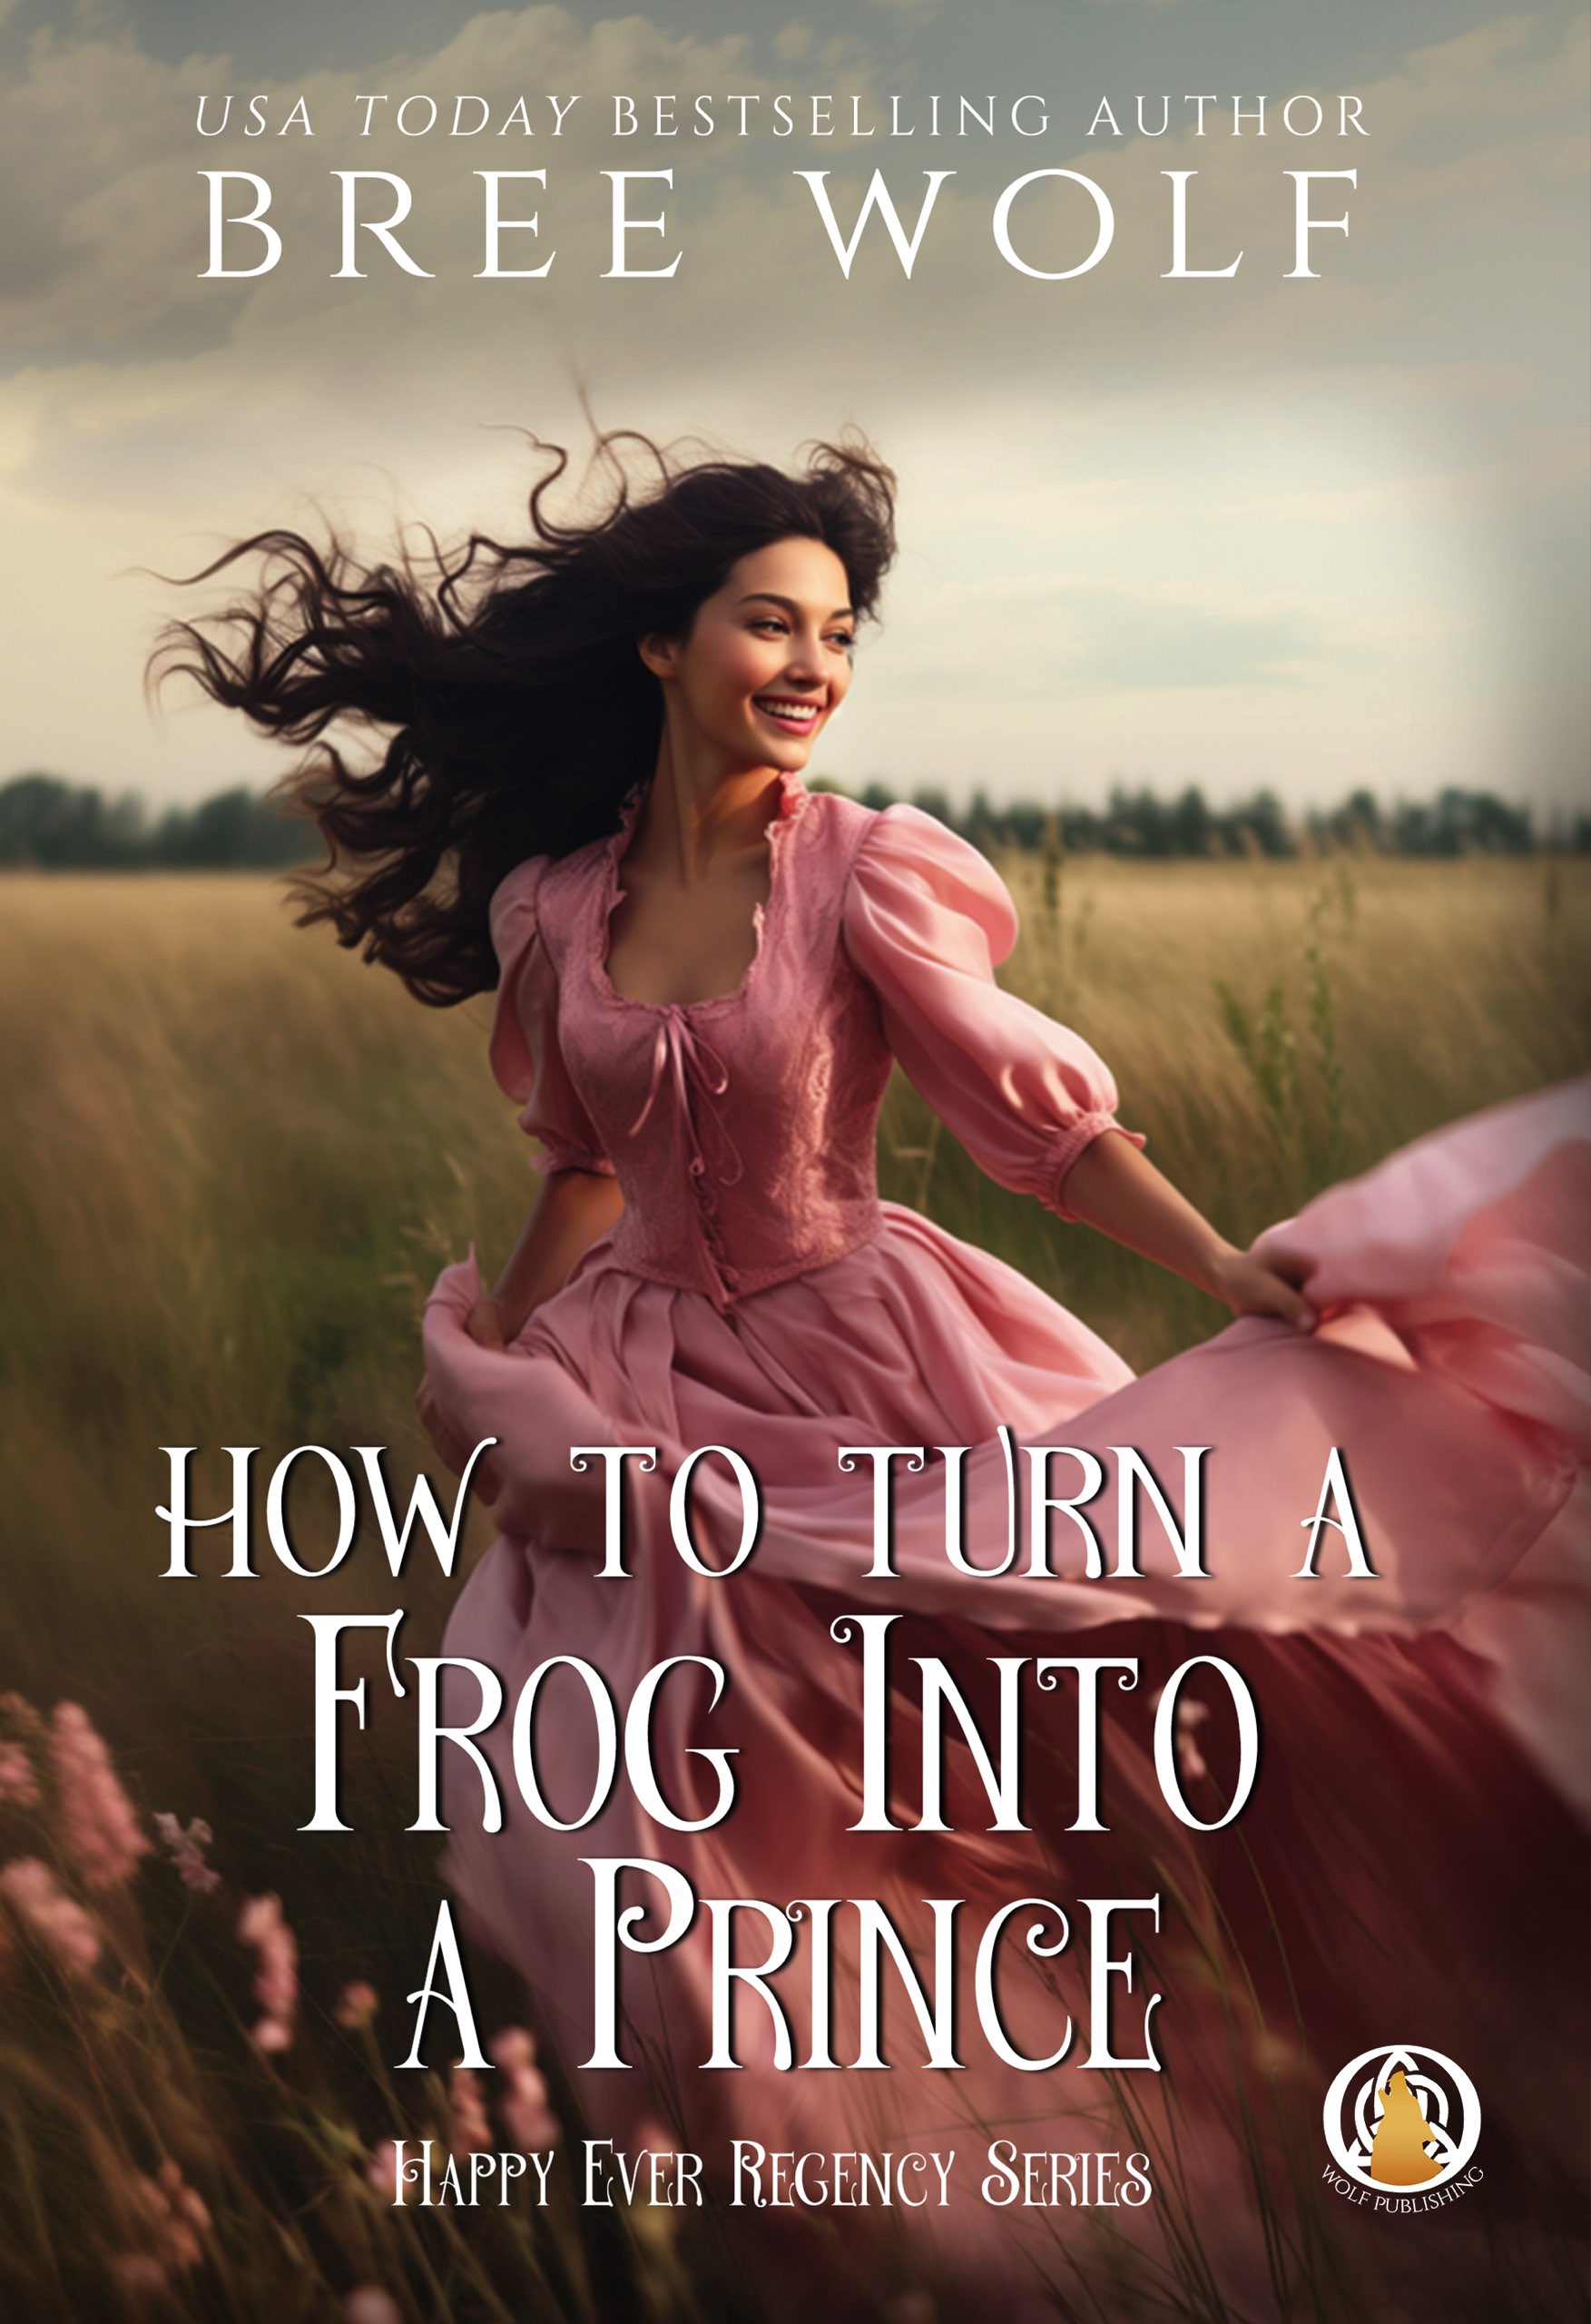 How-to-Turn-a-Frog-into-a-Prince-Generic